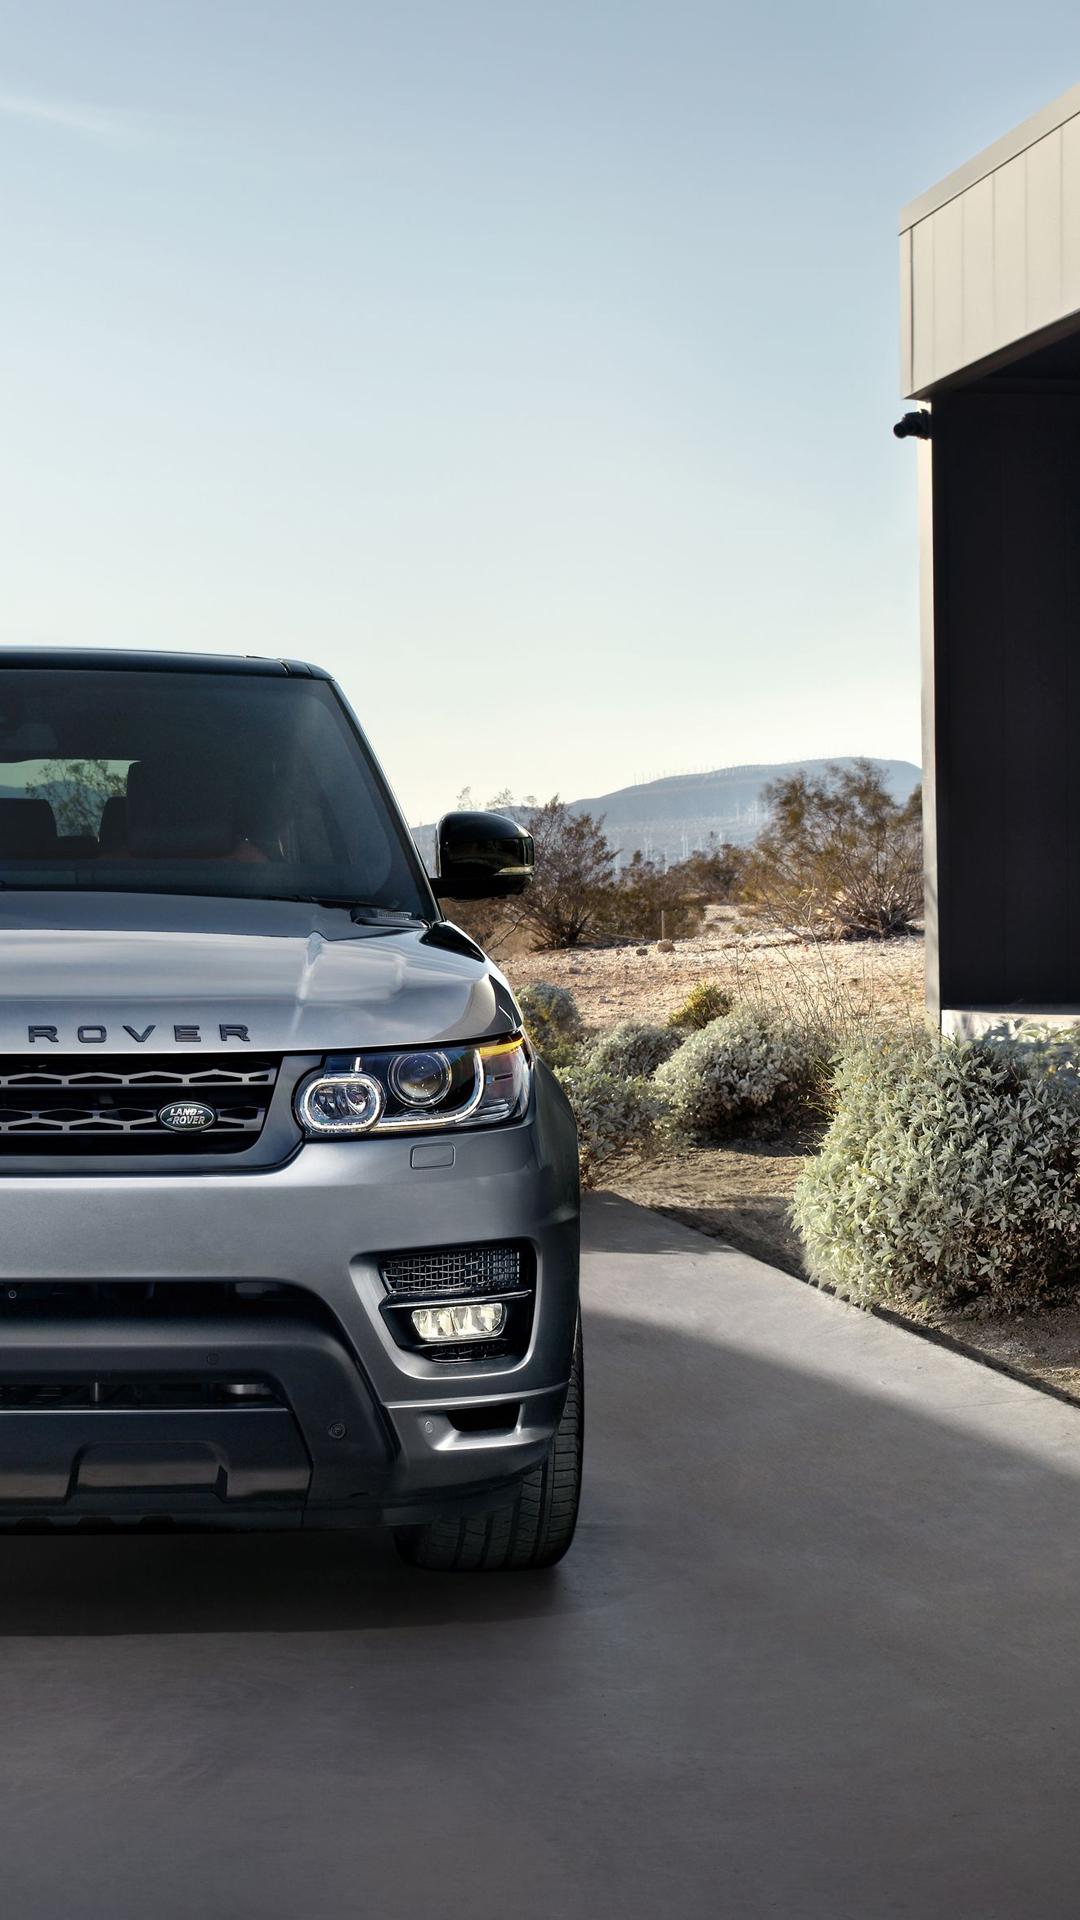 Range Rover Sport Android Wallpaper free download